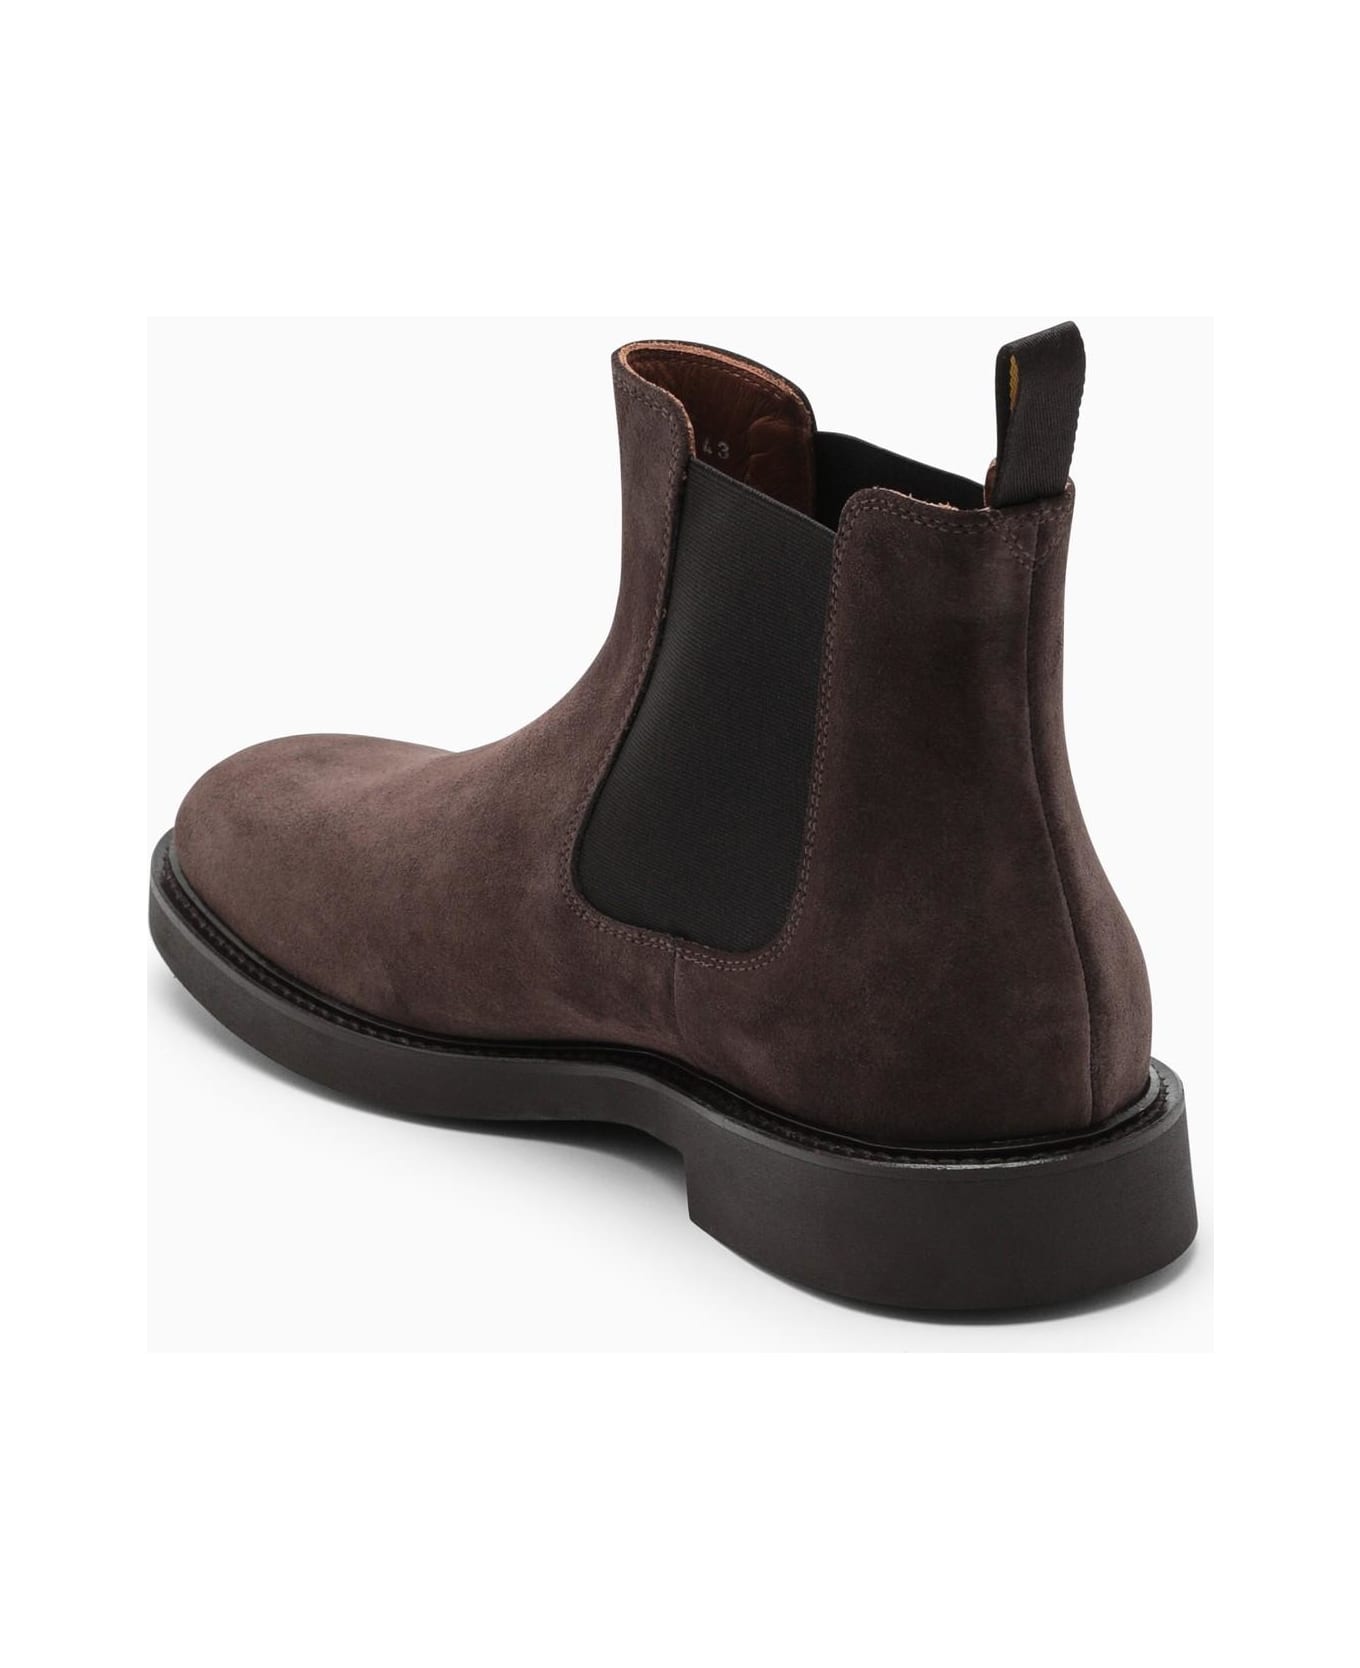 Doucal's Deep Brown Suede Chelsea Boots - Marrone ブーツ